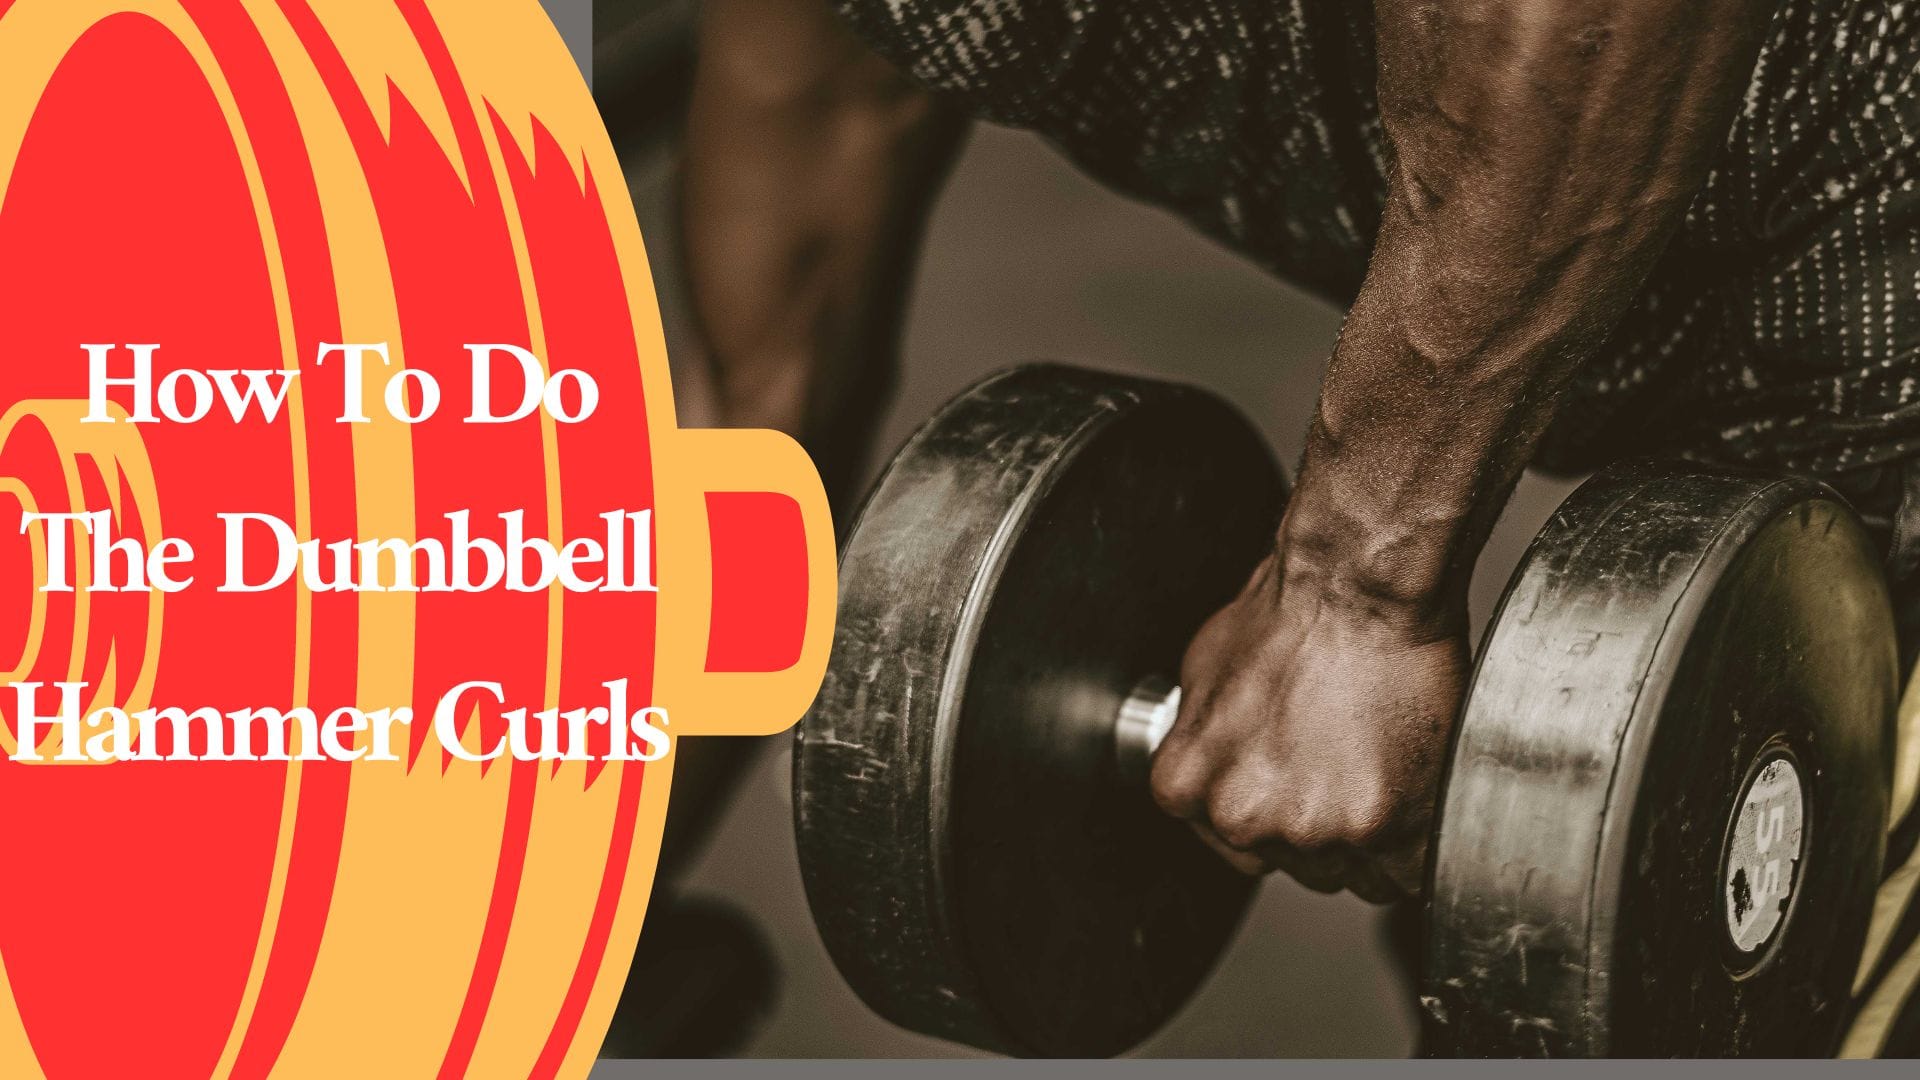 How To Do The Dumbbell Hammer Curls